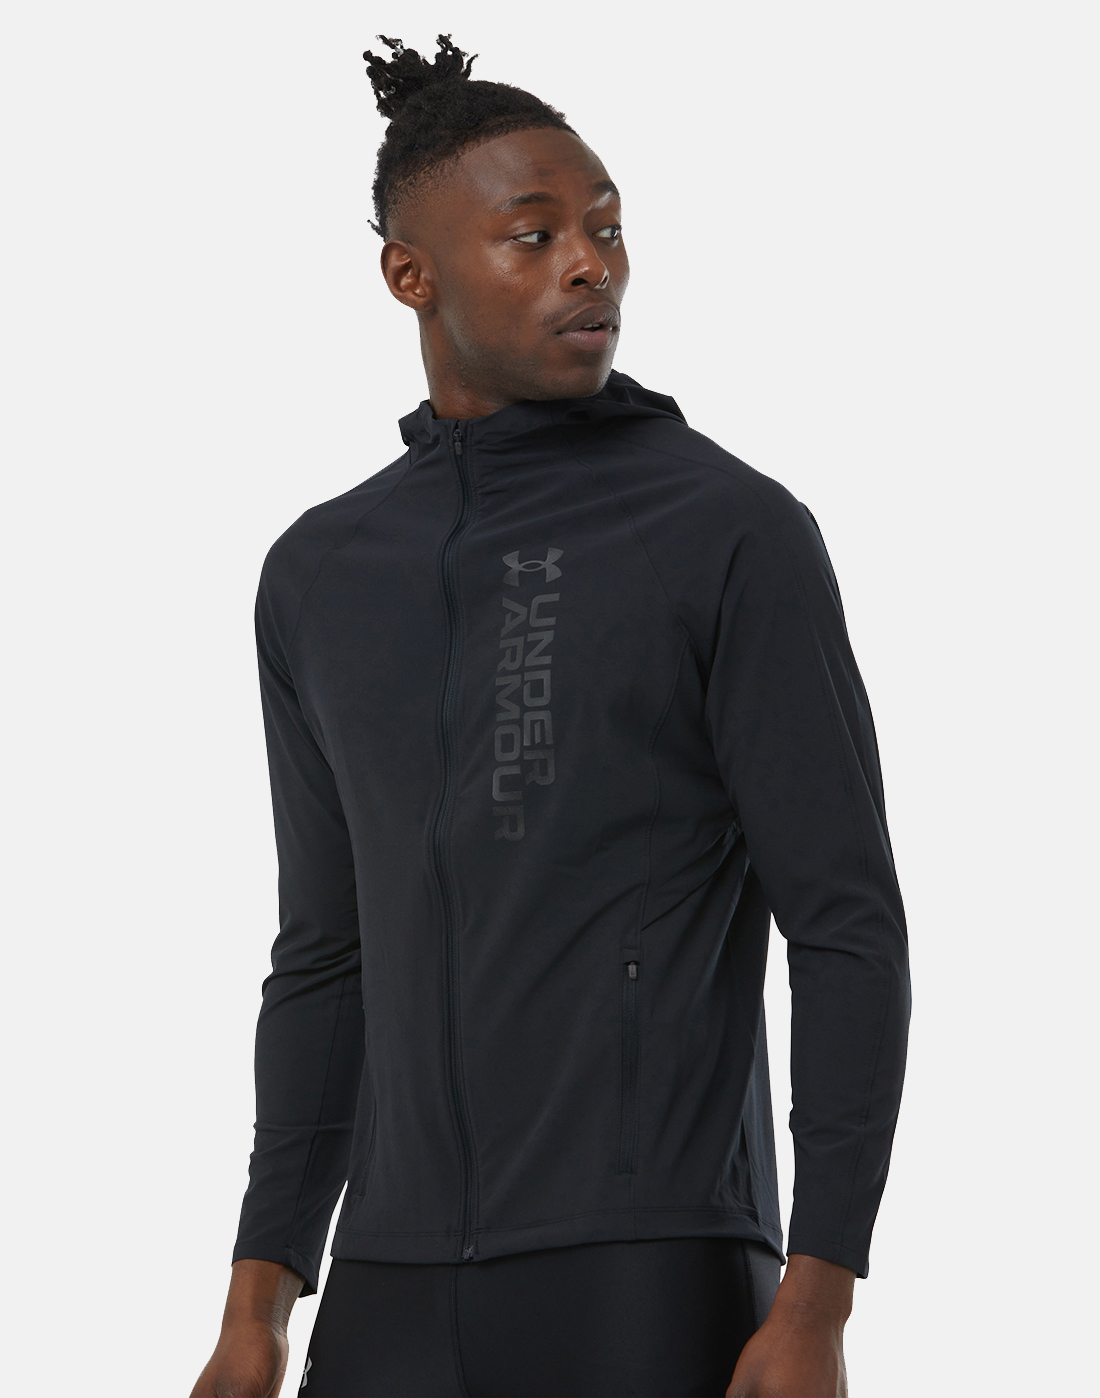 Under Armour Mens Outrun The Storm Jacket - Black | Life Style Sports IE